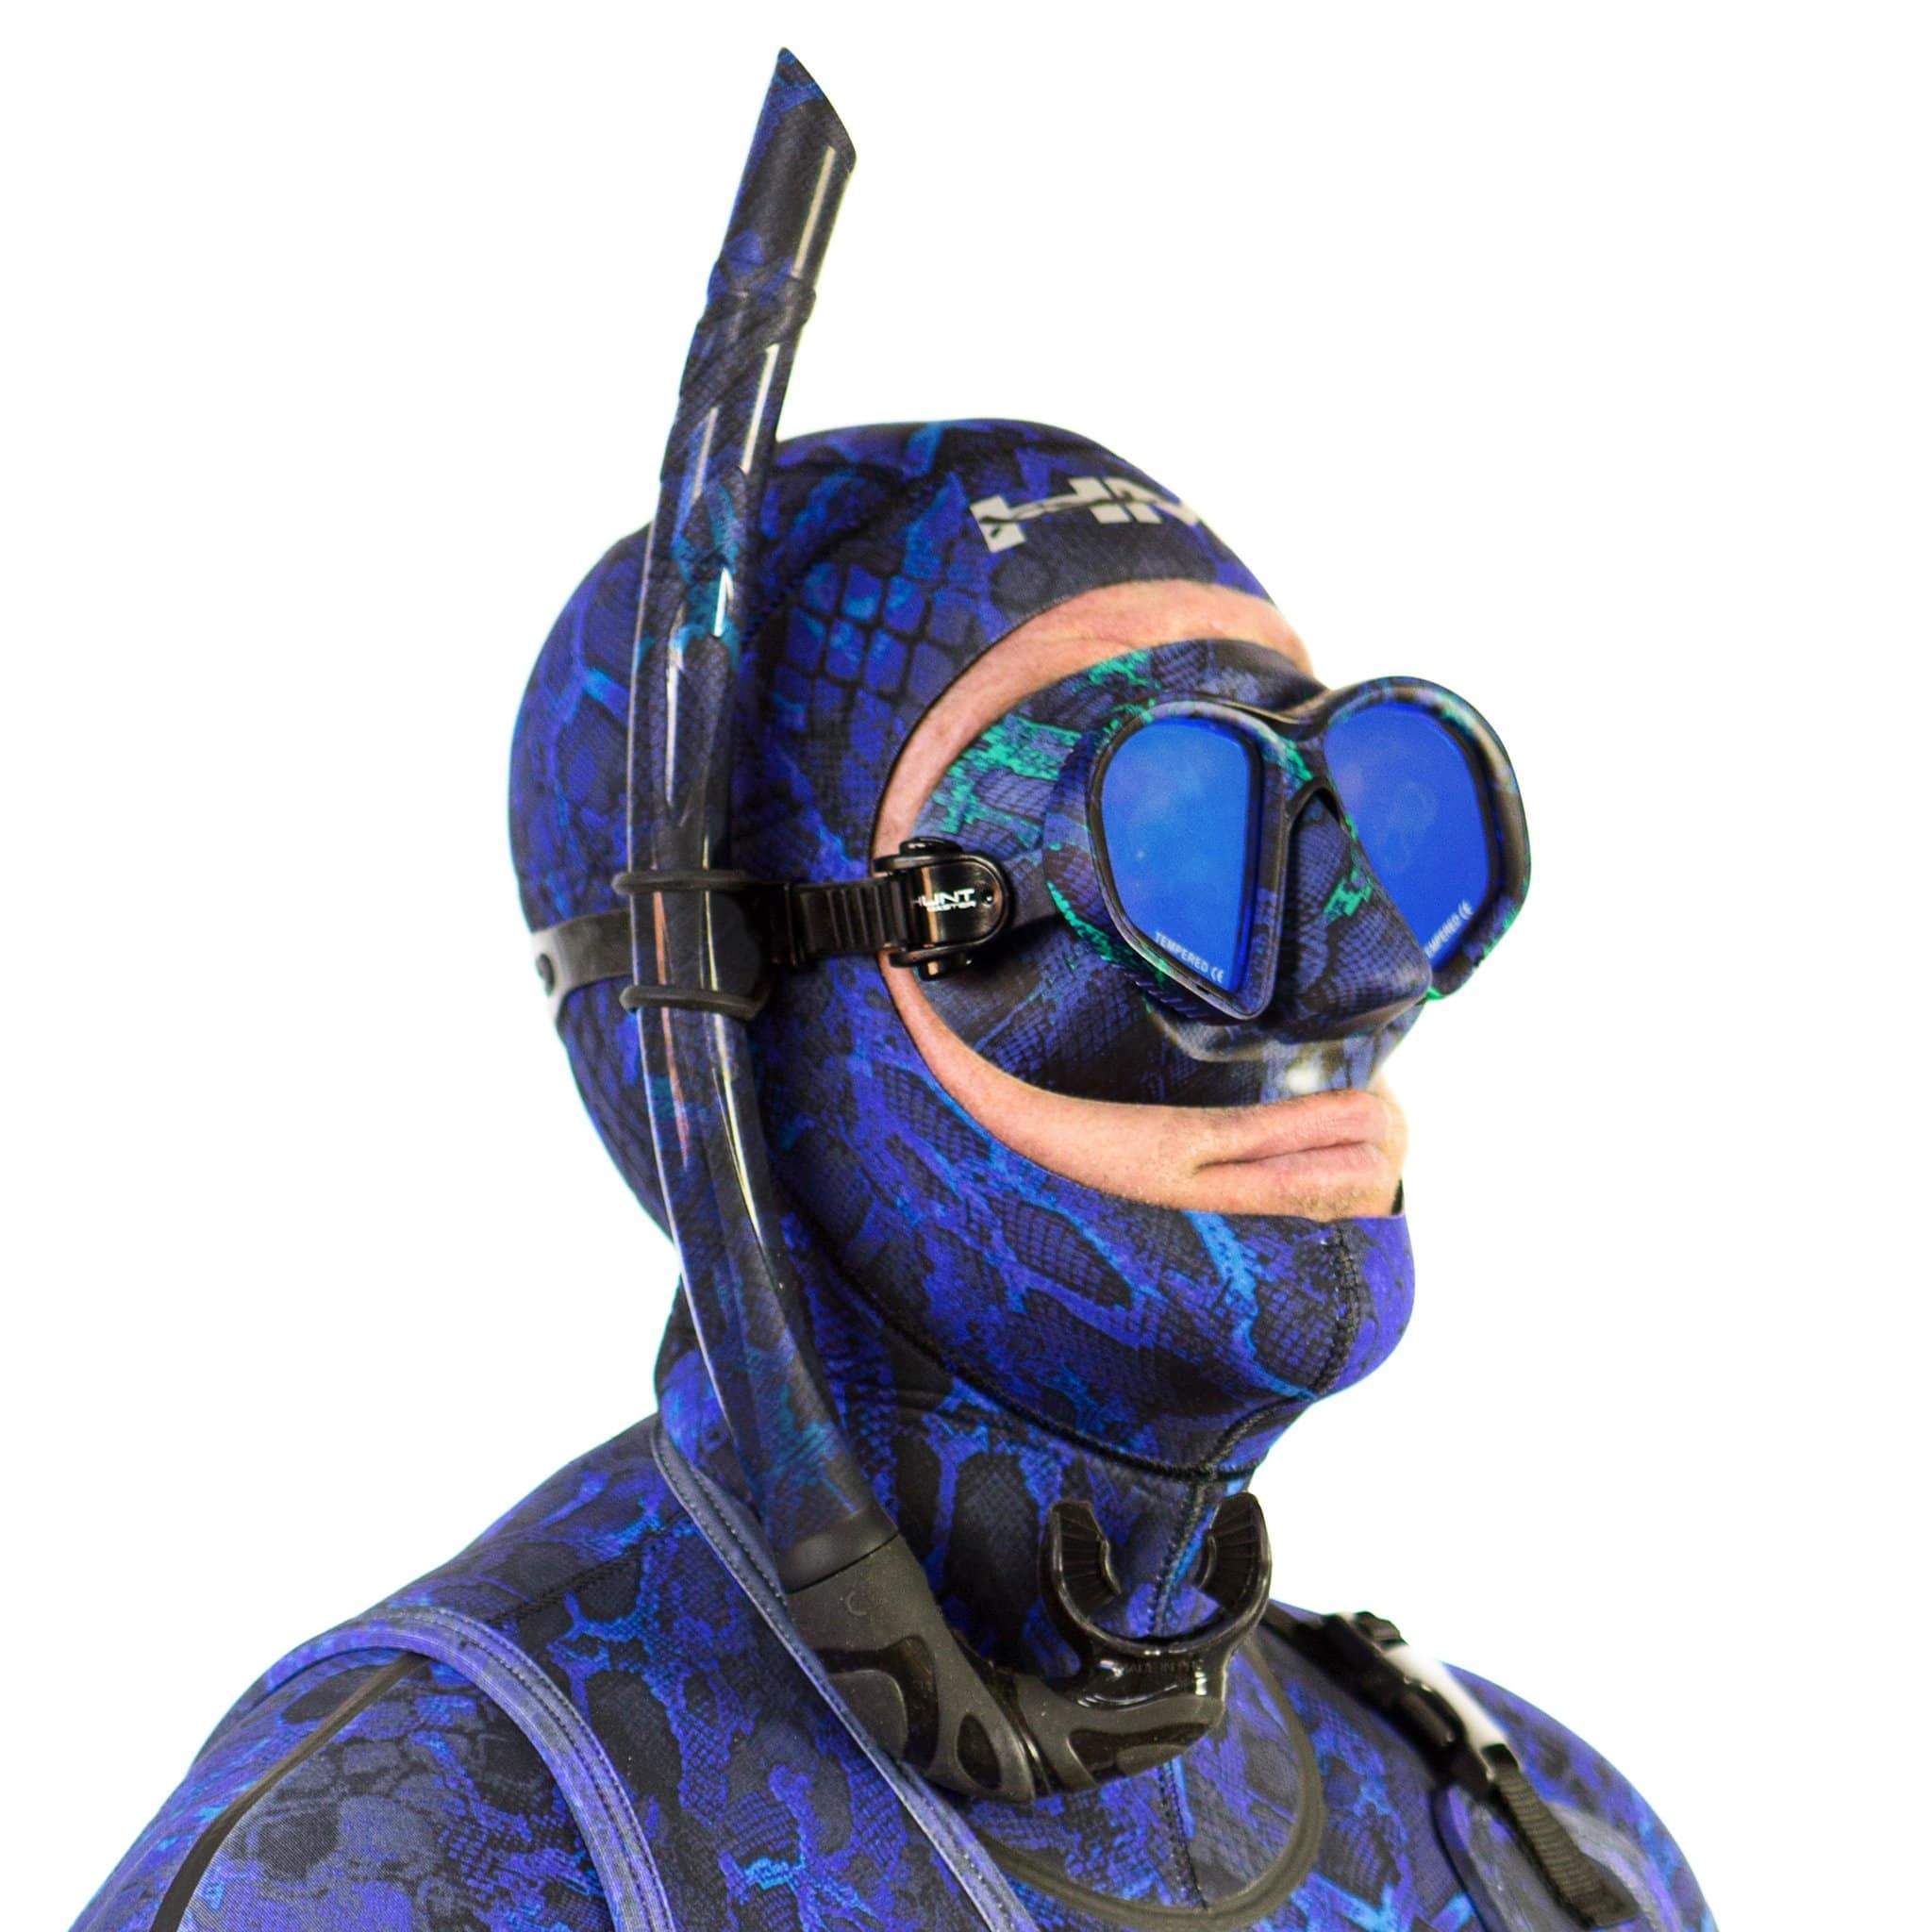 HuntMaster Blue Harbinger Camo Diving Mask- With Matching Camo Container (Blue)